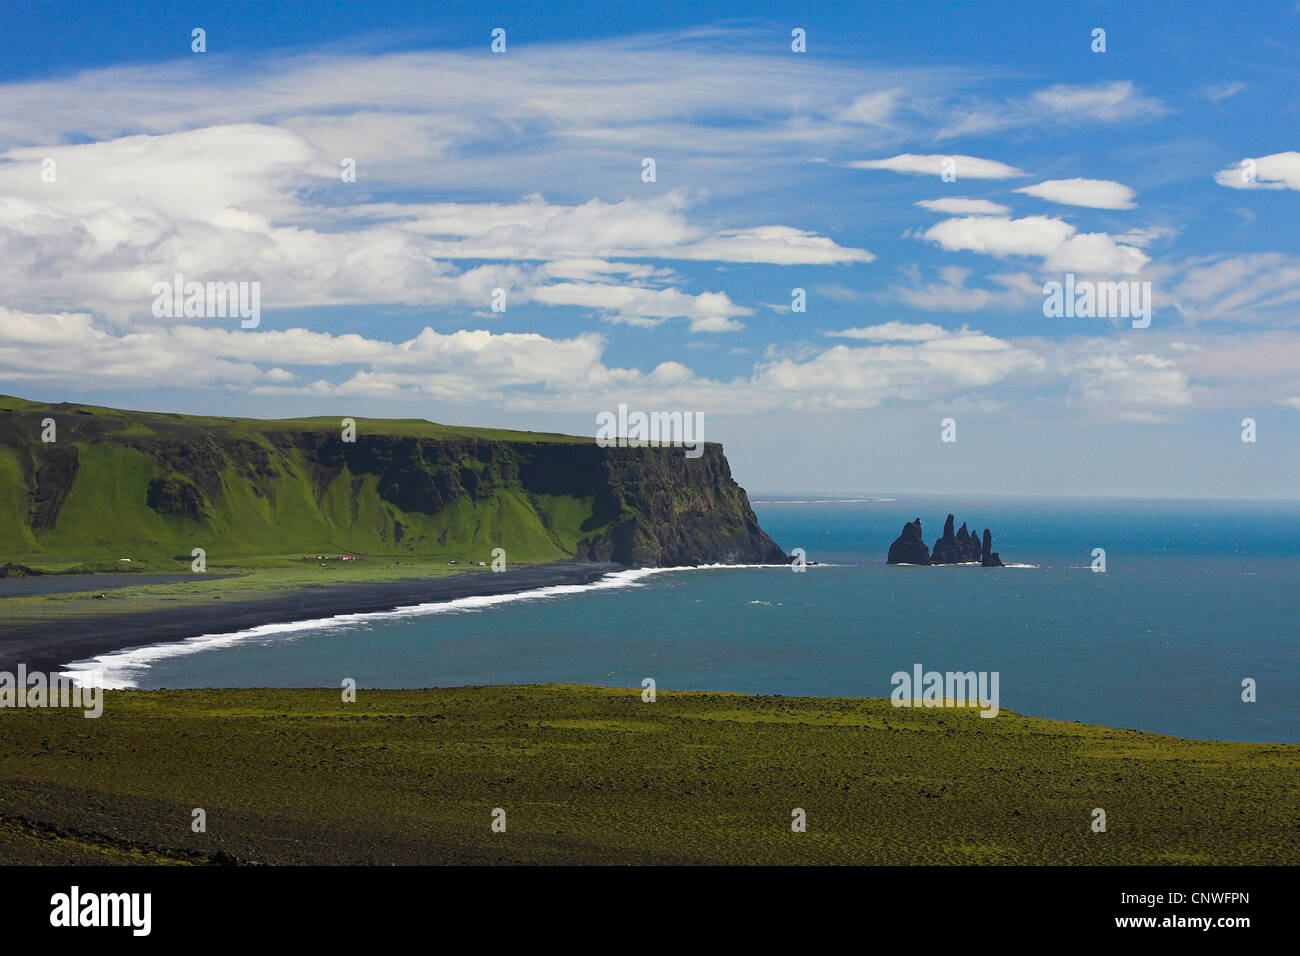 famous black rock needles 'Reynisdrangar' in front of cliff line at the southernmost place on Island, Iceland, Mrdalur, Vik i Myrdal Stock Photo